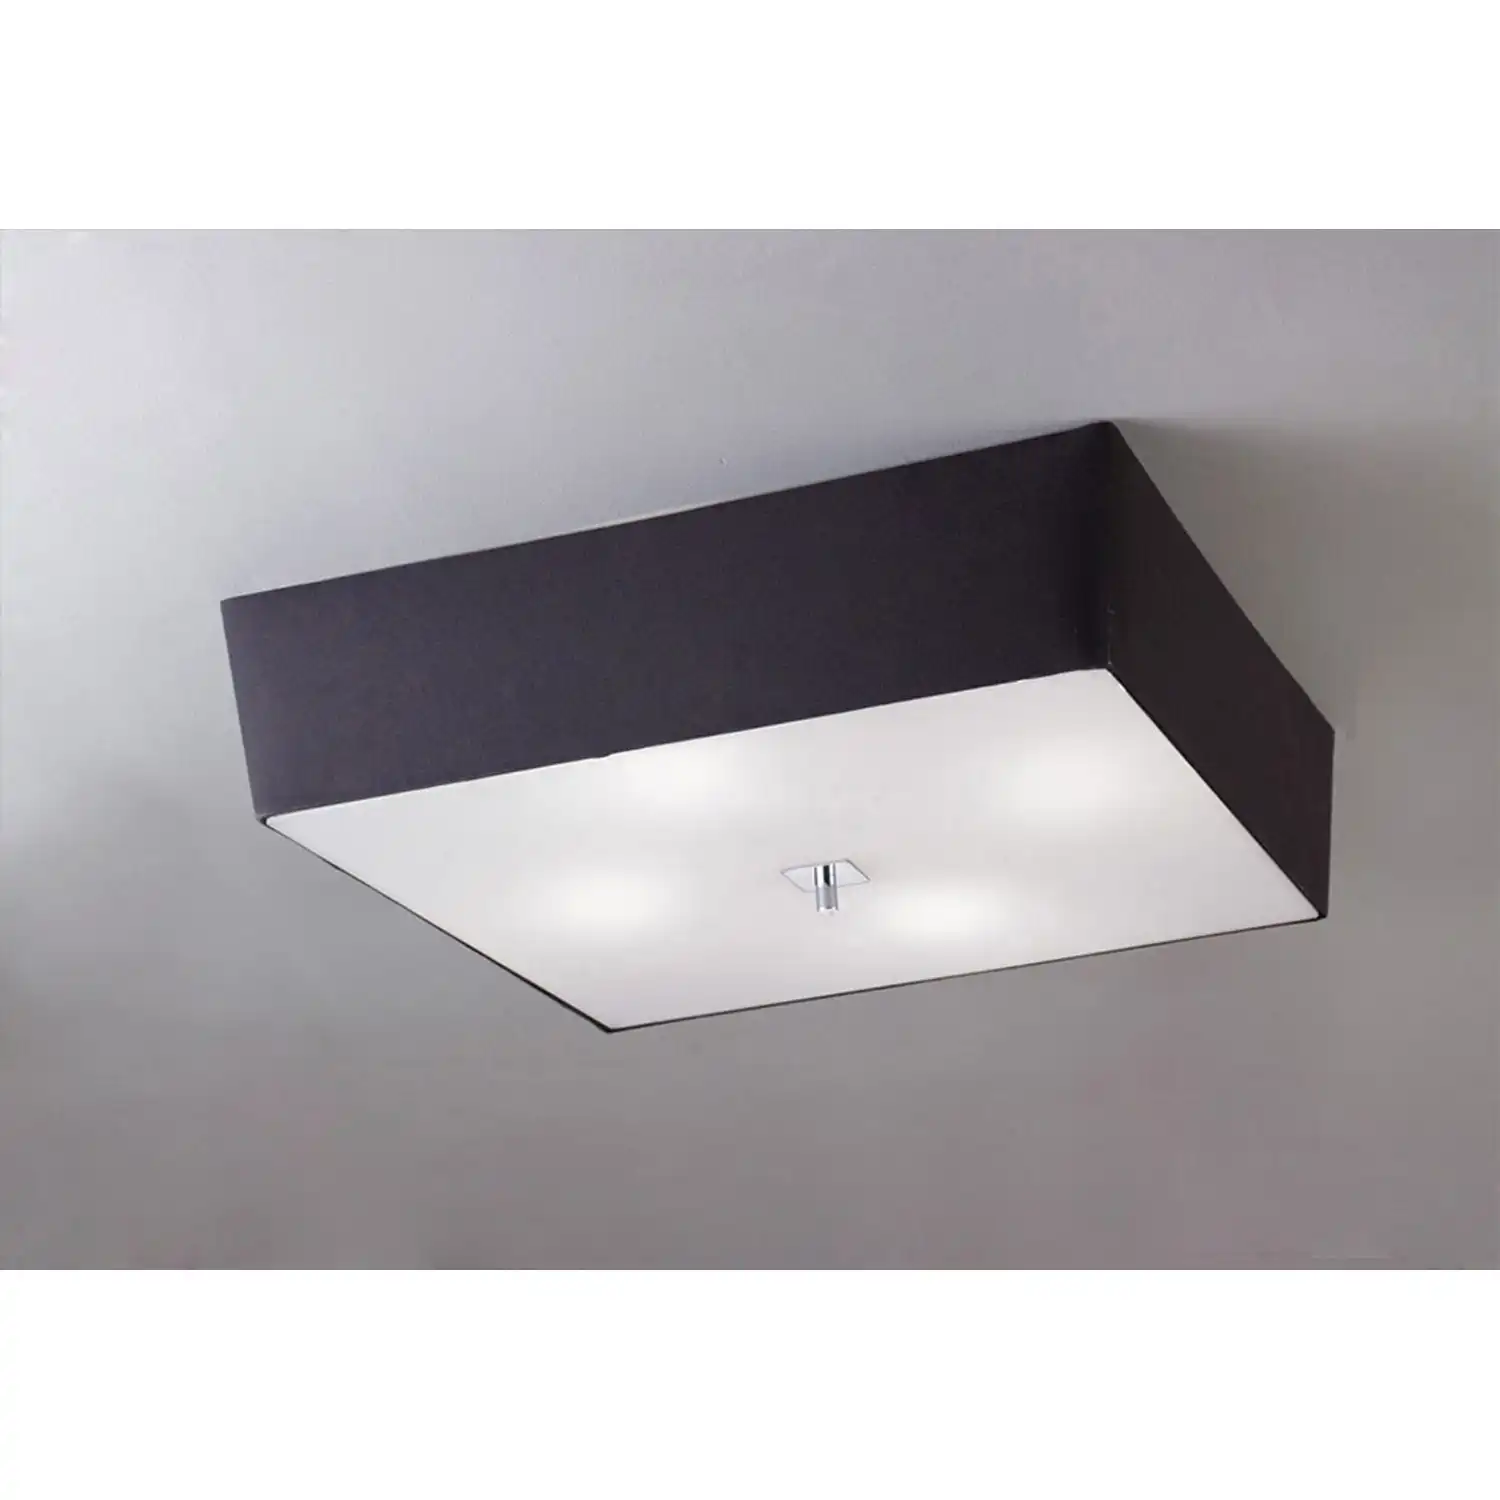 Akira Square Flush Ceiling 4 Light E27, Polished Chrome Frosted Glass With Black Shade